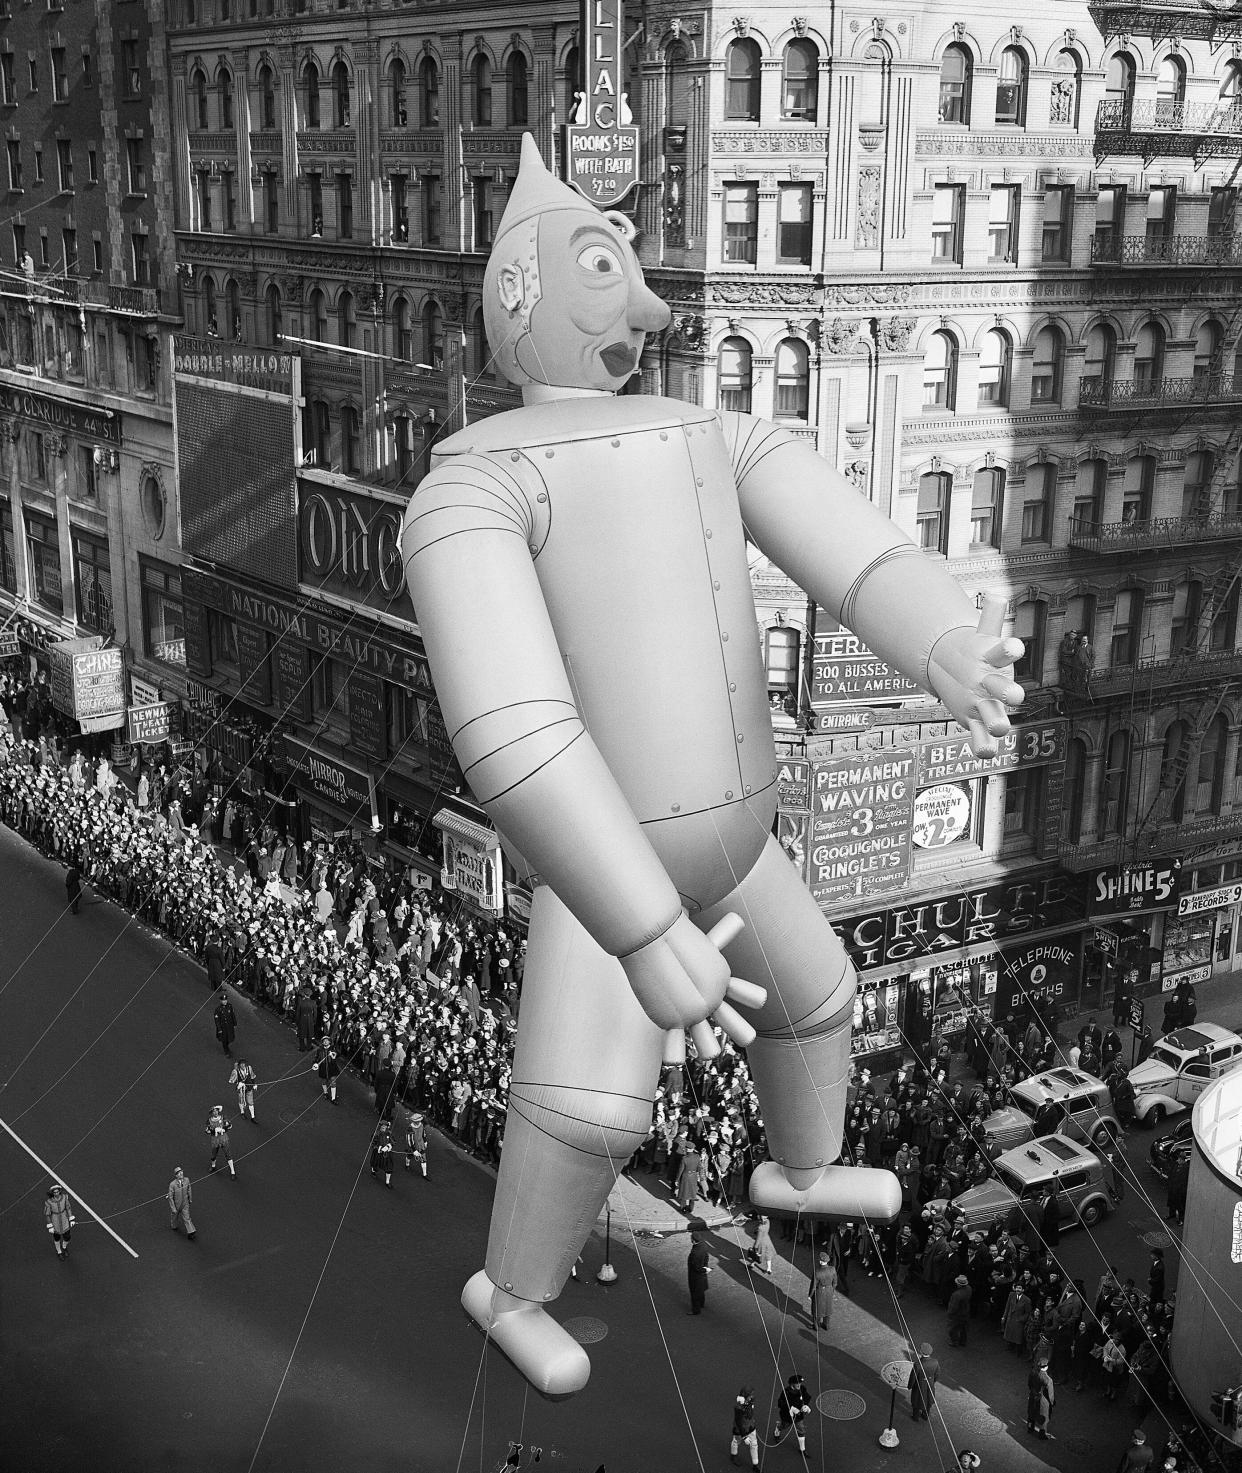 Tin-Man from the "Wizard of Oz," viewed from the sixth story of a Times Square building